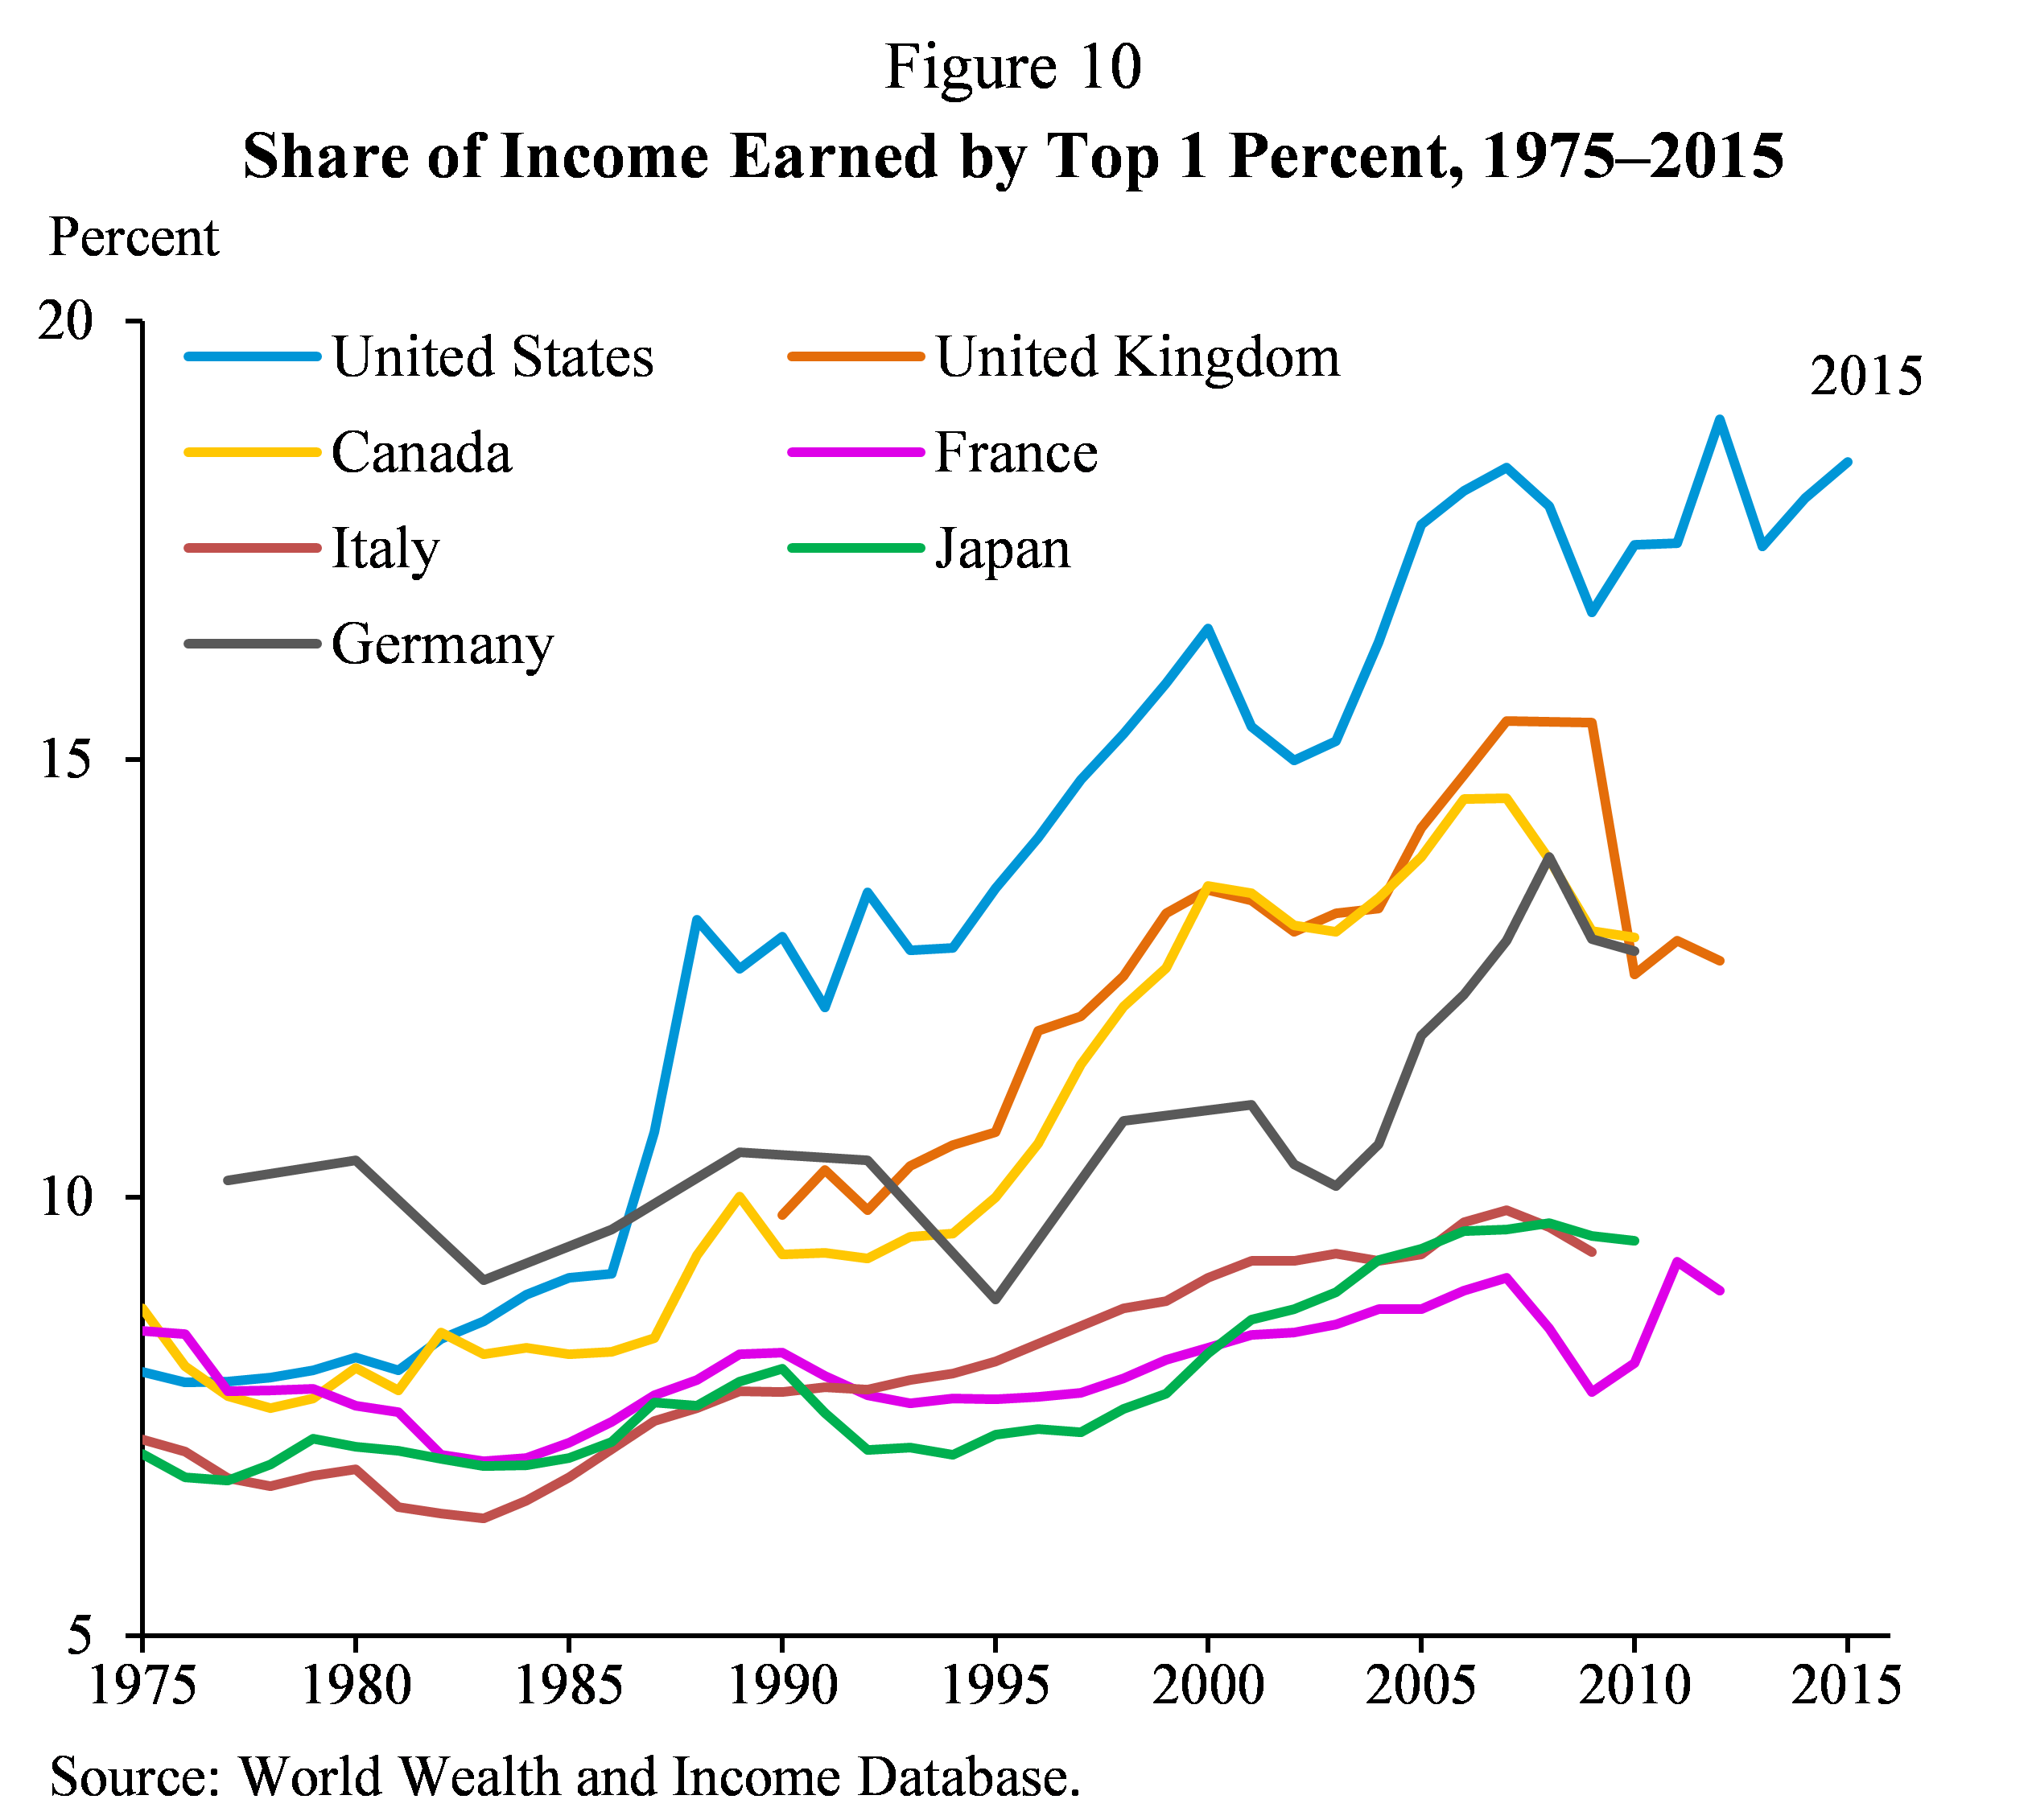 Figure 10.  Share of Income Earned by Top 1 Percent, 1975-2015